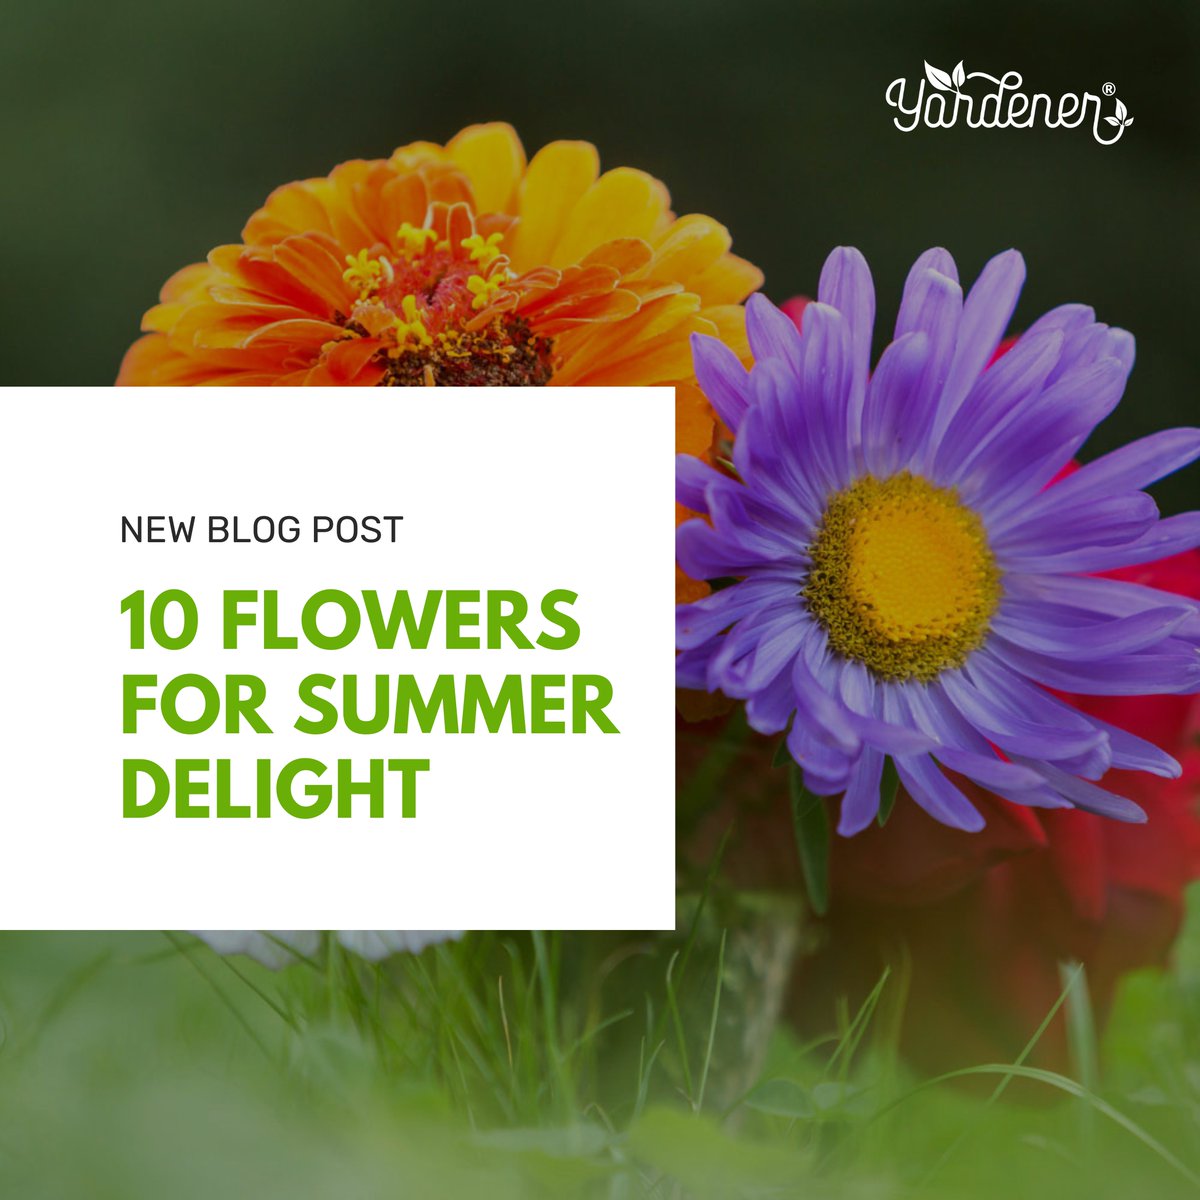 Immerse yourself in the magic of summer with our thoughtfully curated selection of 10 summer flowers. Plant them now and experience the enchantment of their stunning blooms! Read 👉 s.yardener.com/s/ahasp #yardener #SummerBlooms #SummerGardening #BlossomsOfSummer #GardeningX